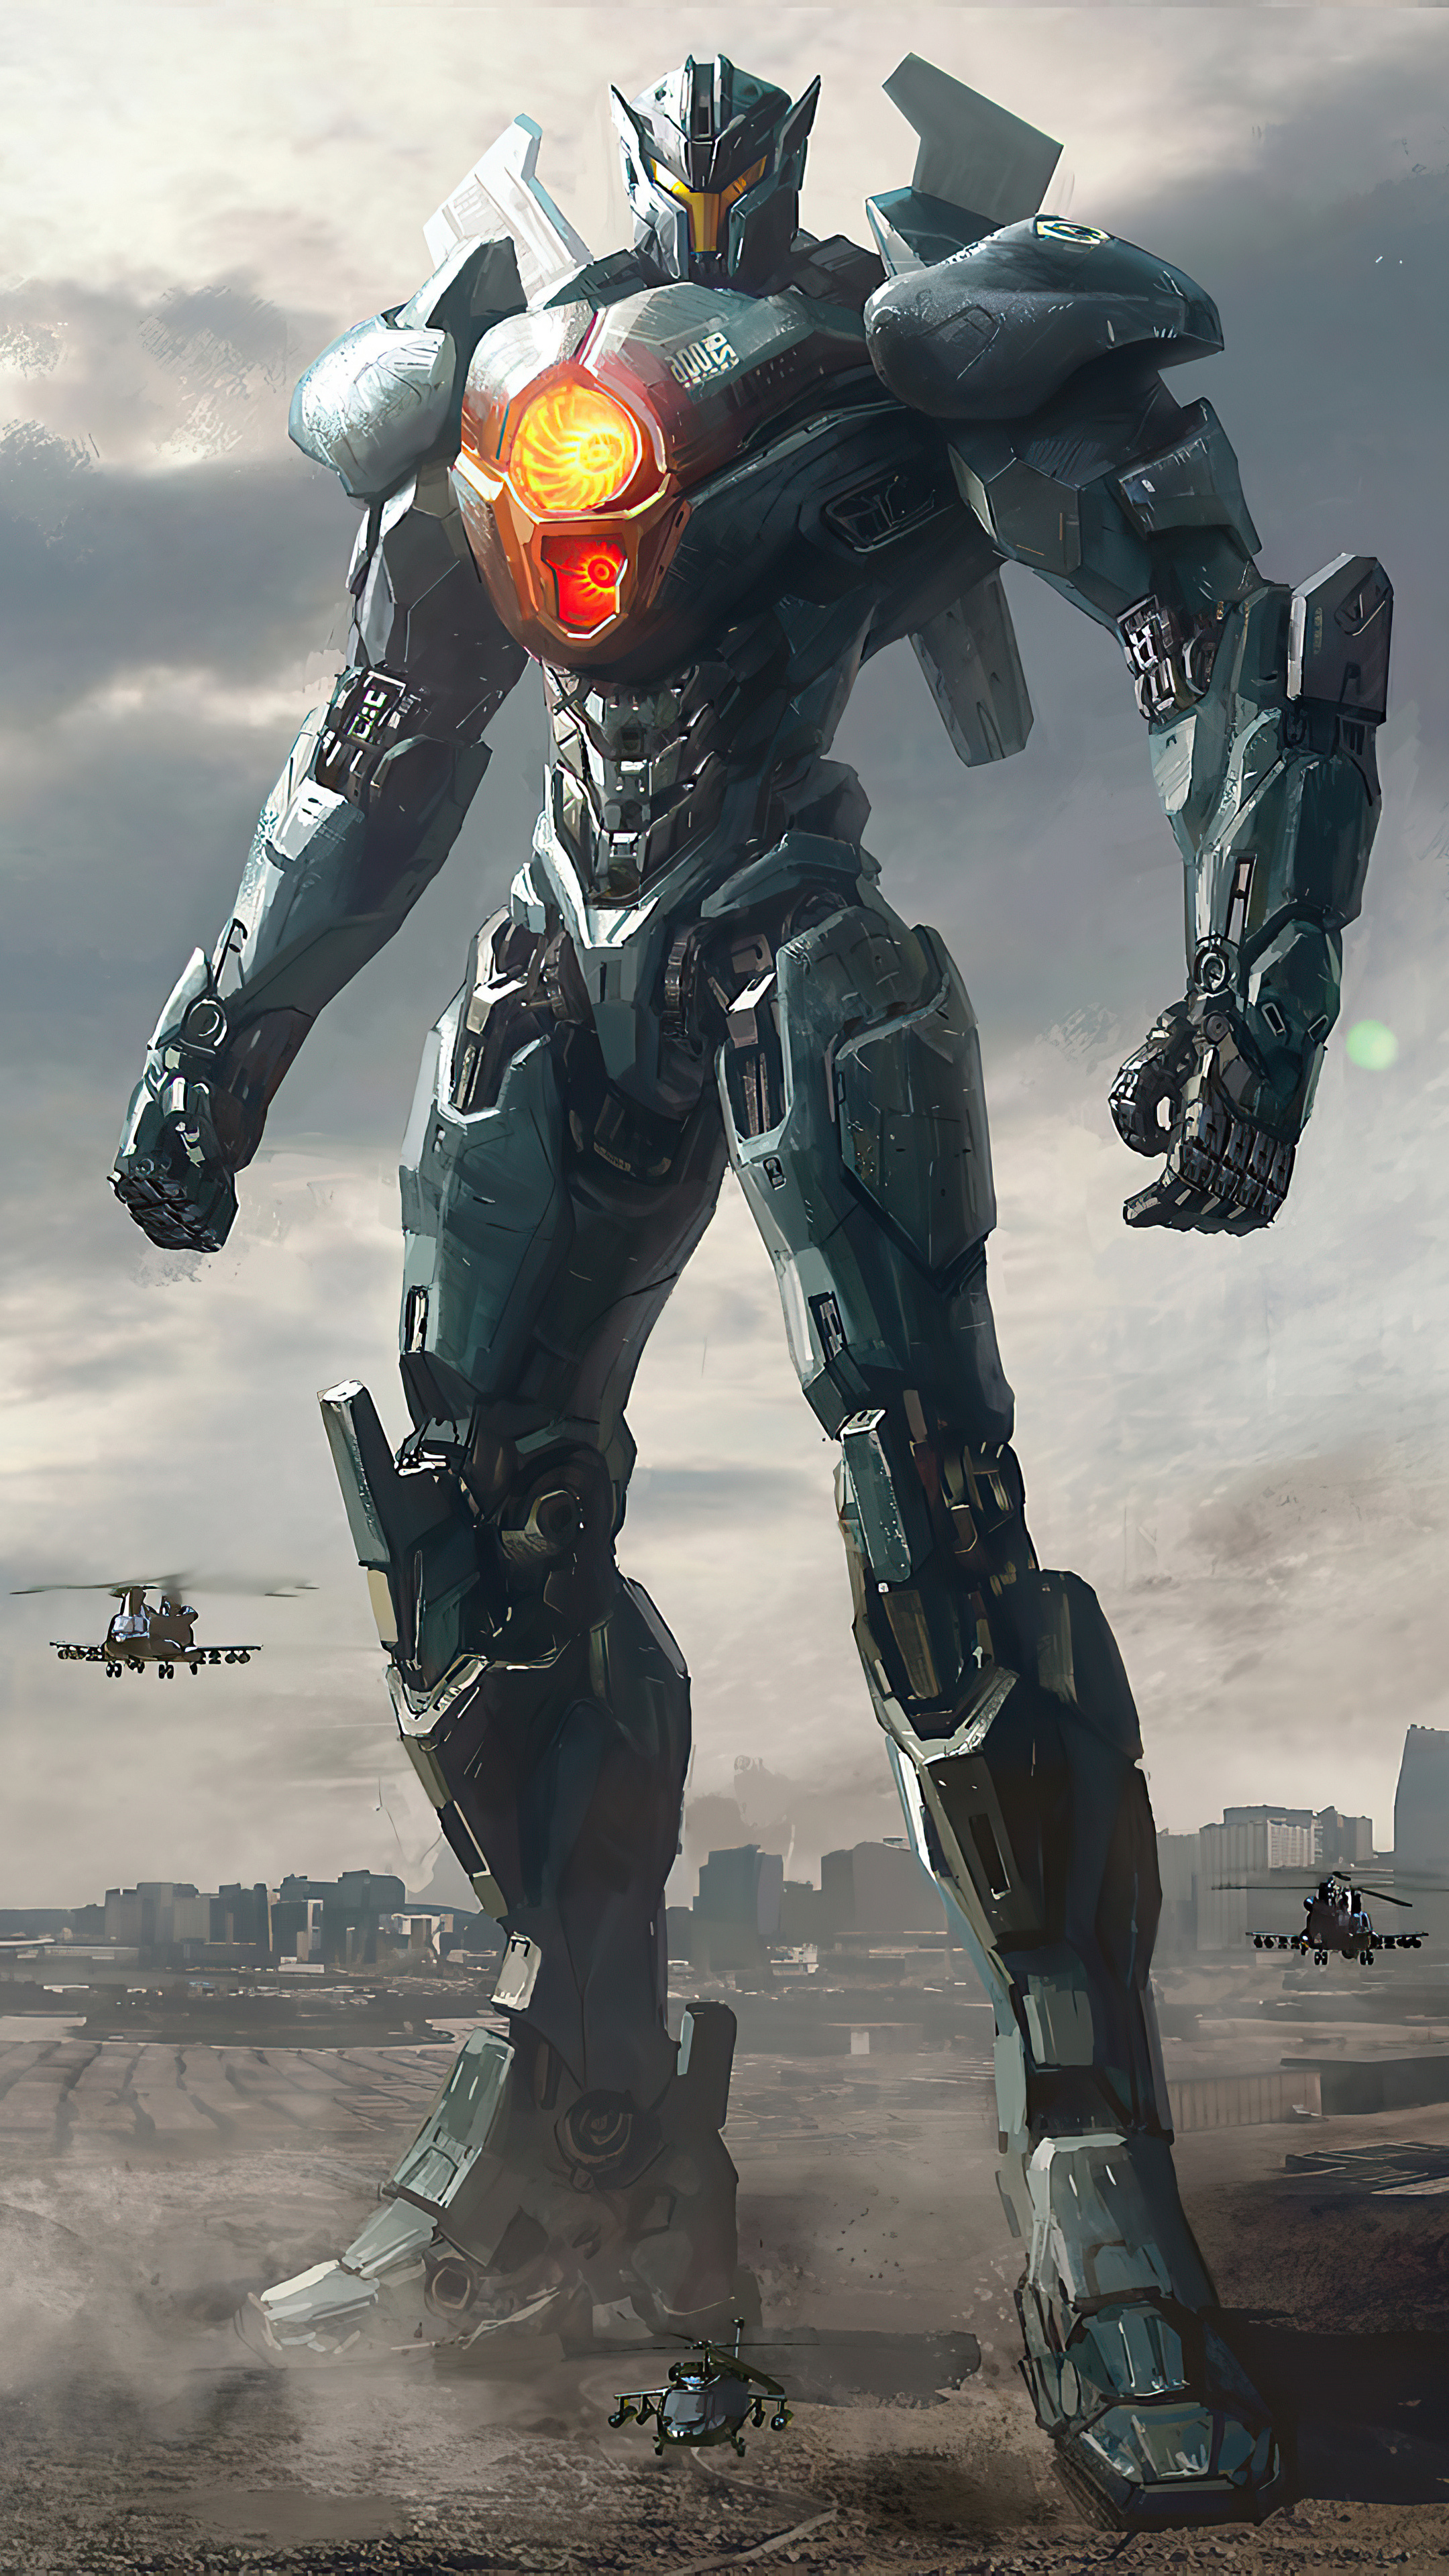 pacific rim wallpaper by silverbull735 - Download on ZEDGE™ | db4d